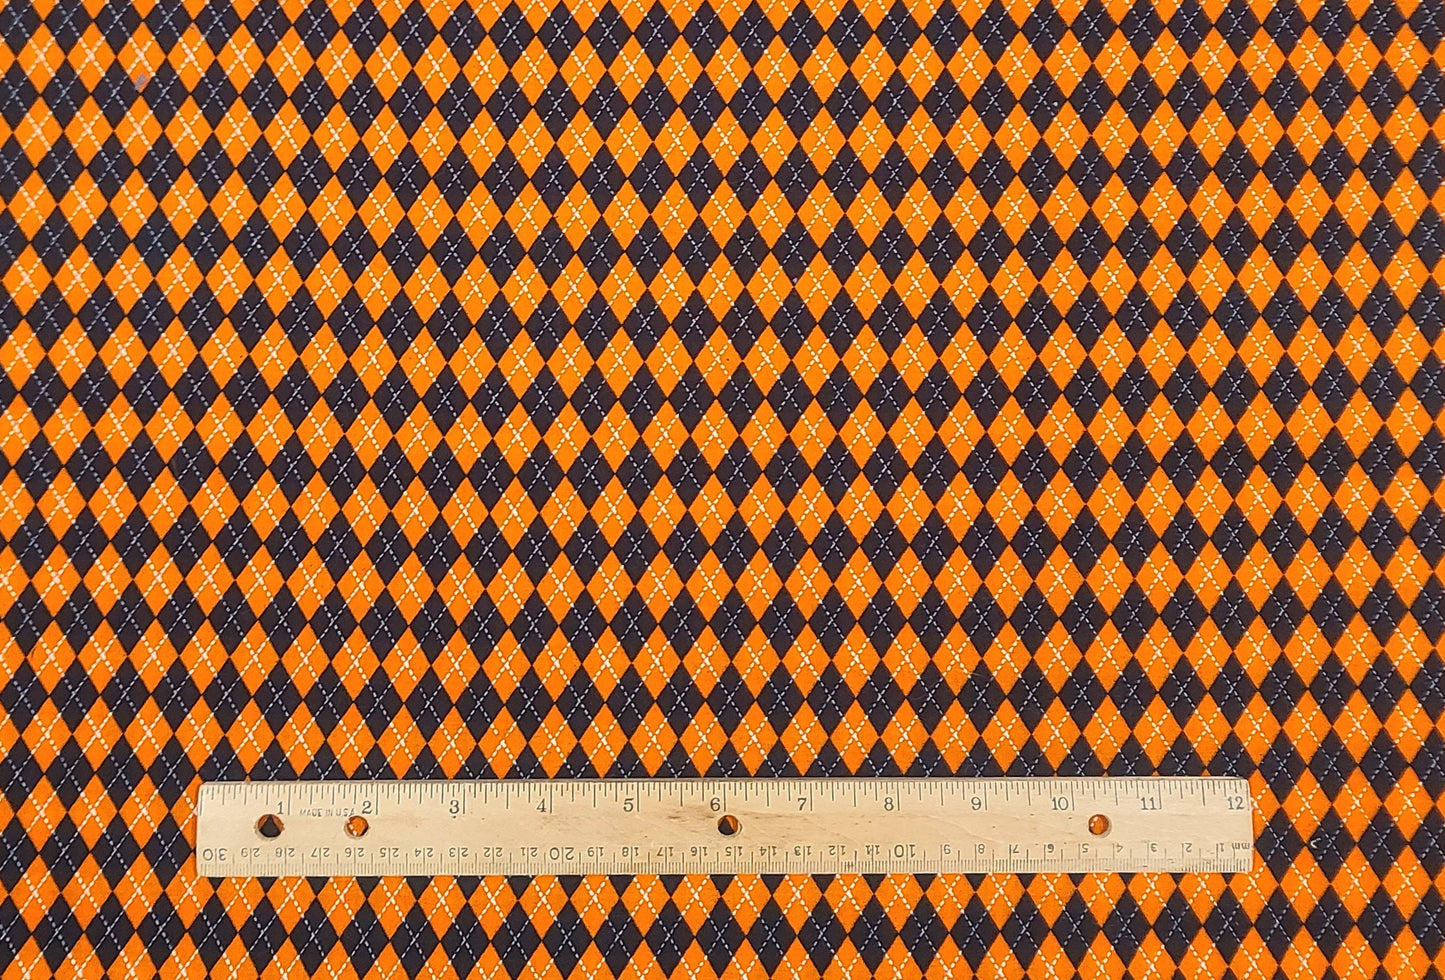 EOB - Designed and Produced Exclusively for JoAnn Fabric and Craft Stores - Black, Orange and White Argyle Print Fabric